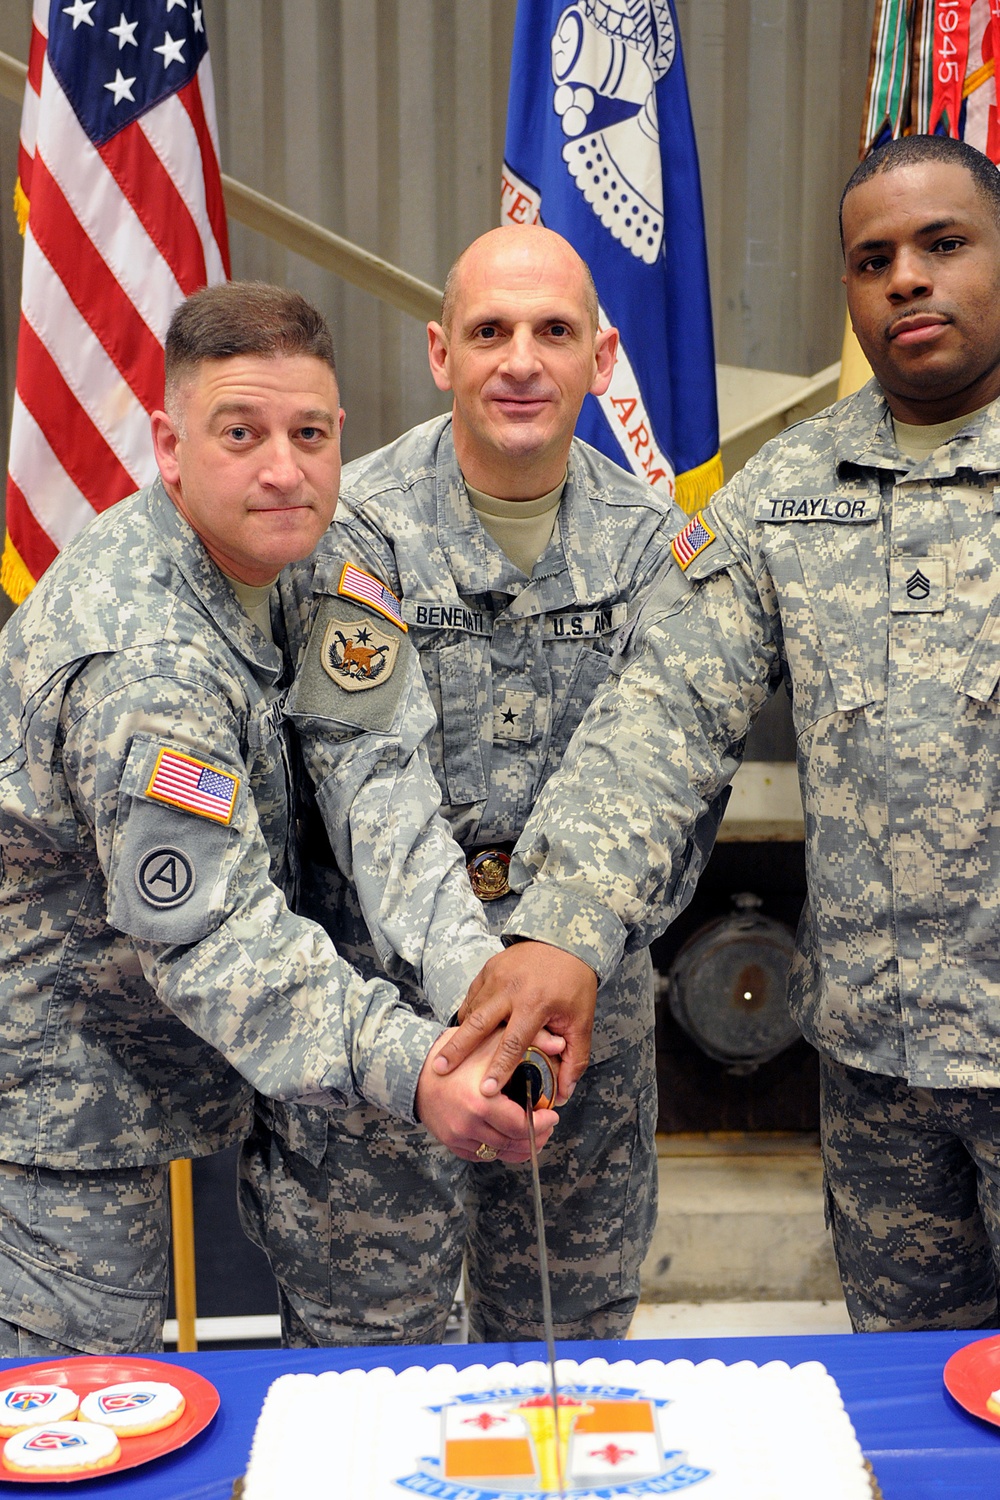 Army Reserve’s newest sustainment command holds activation ceremony